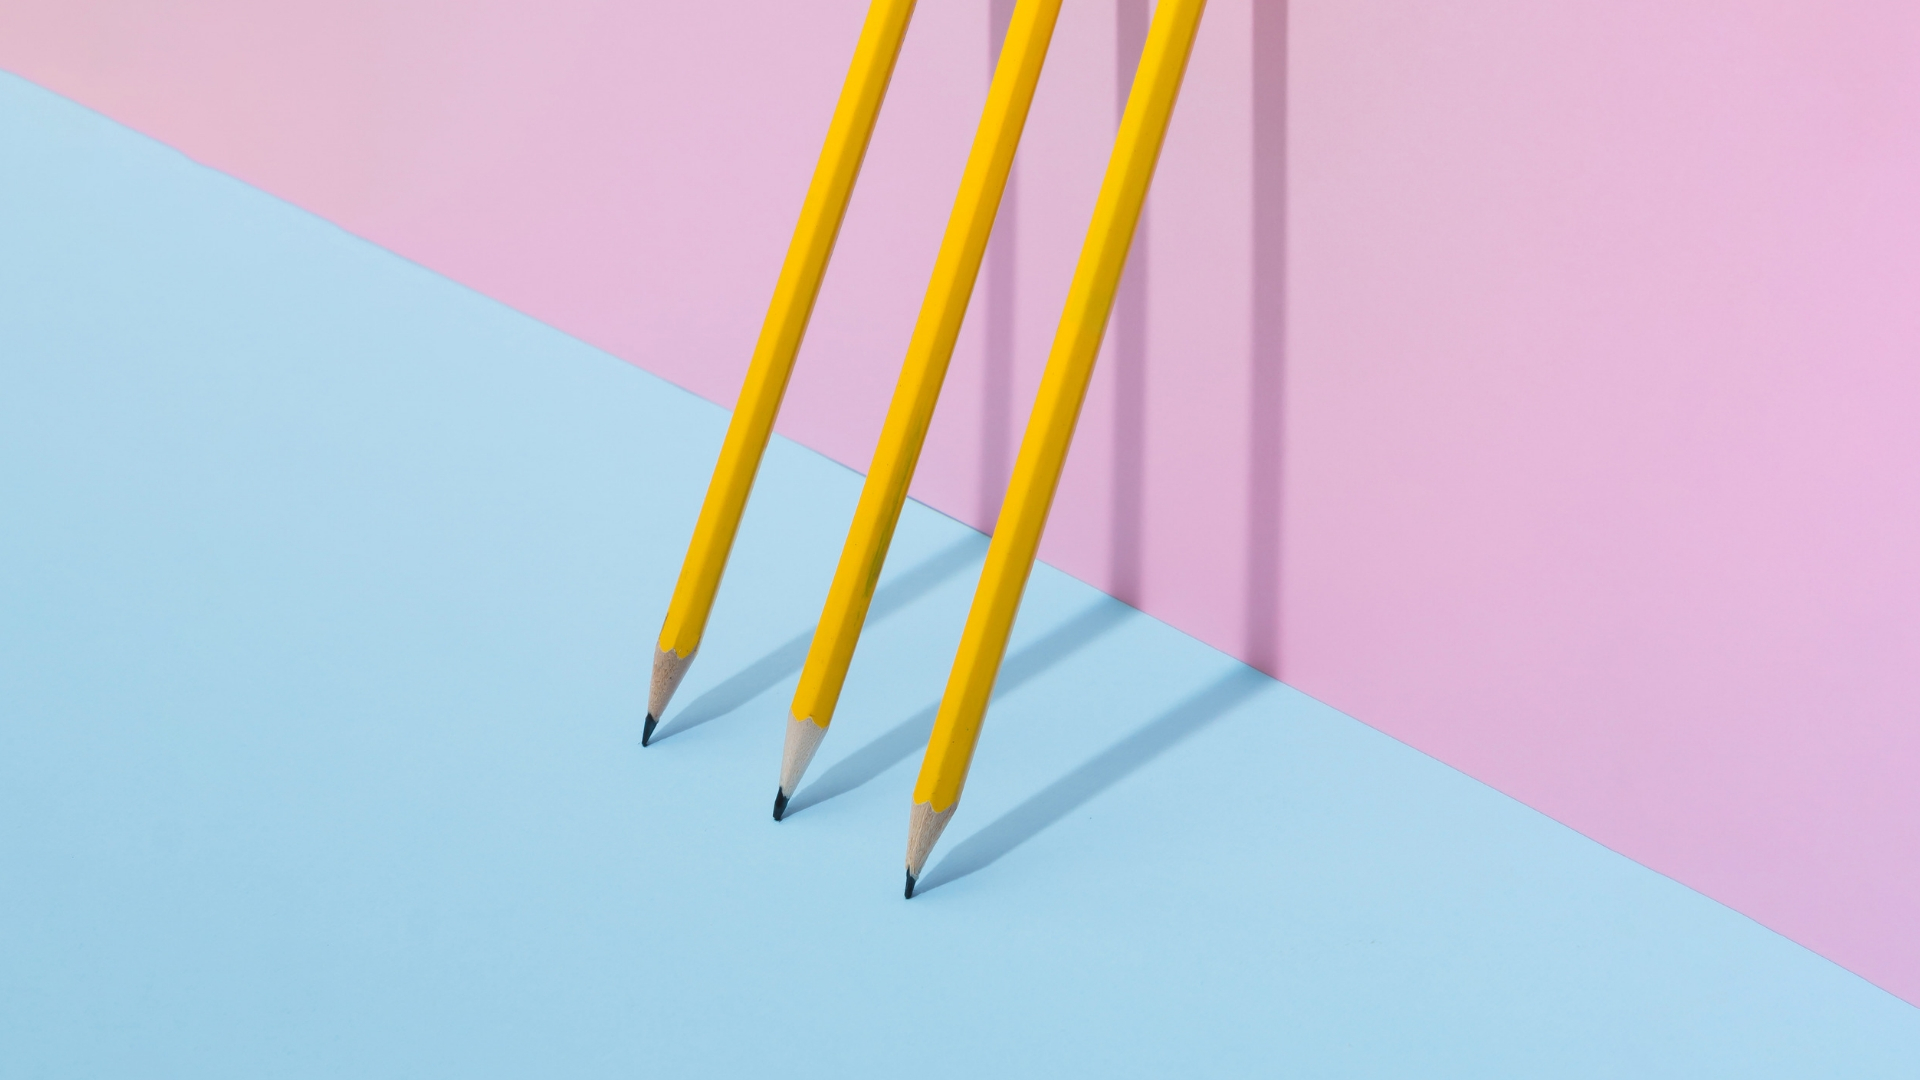 light-and-shadow-pencil-reflection-example-website-design-element-depth-perception